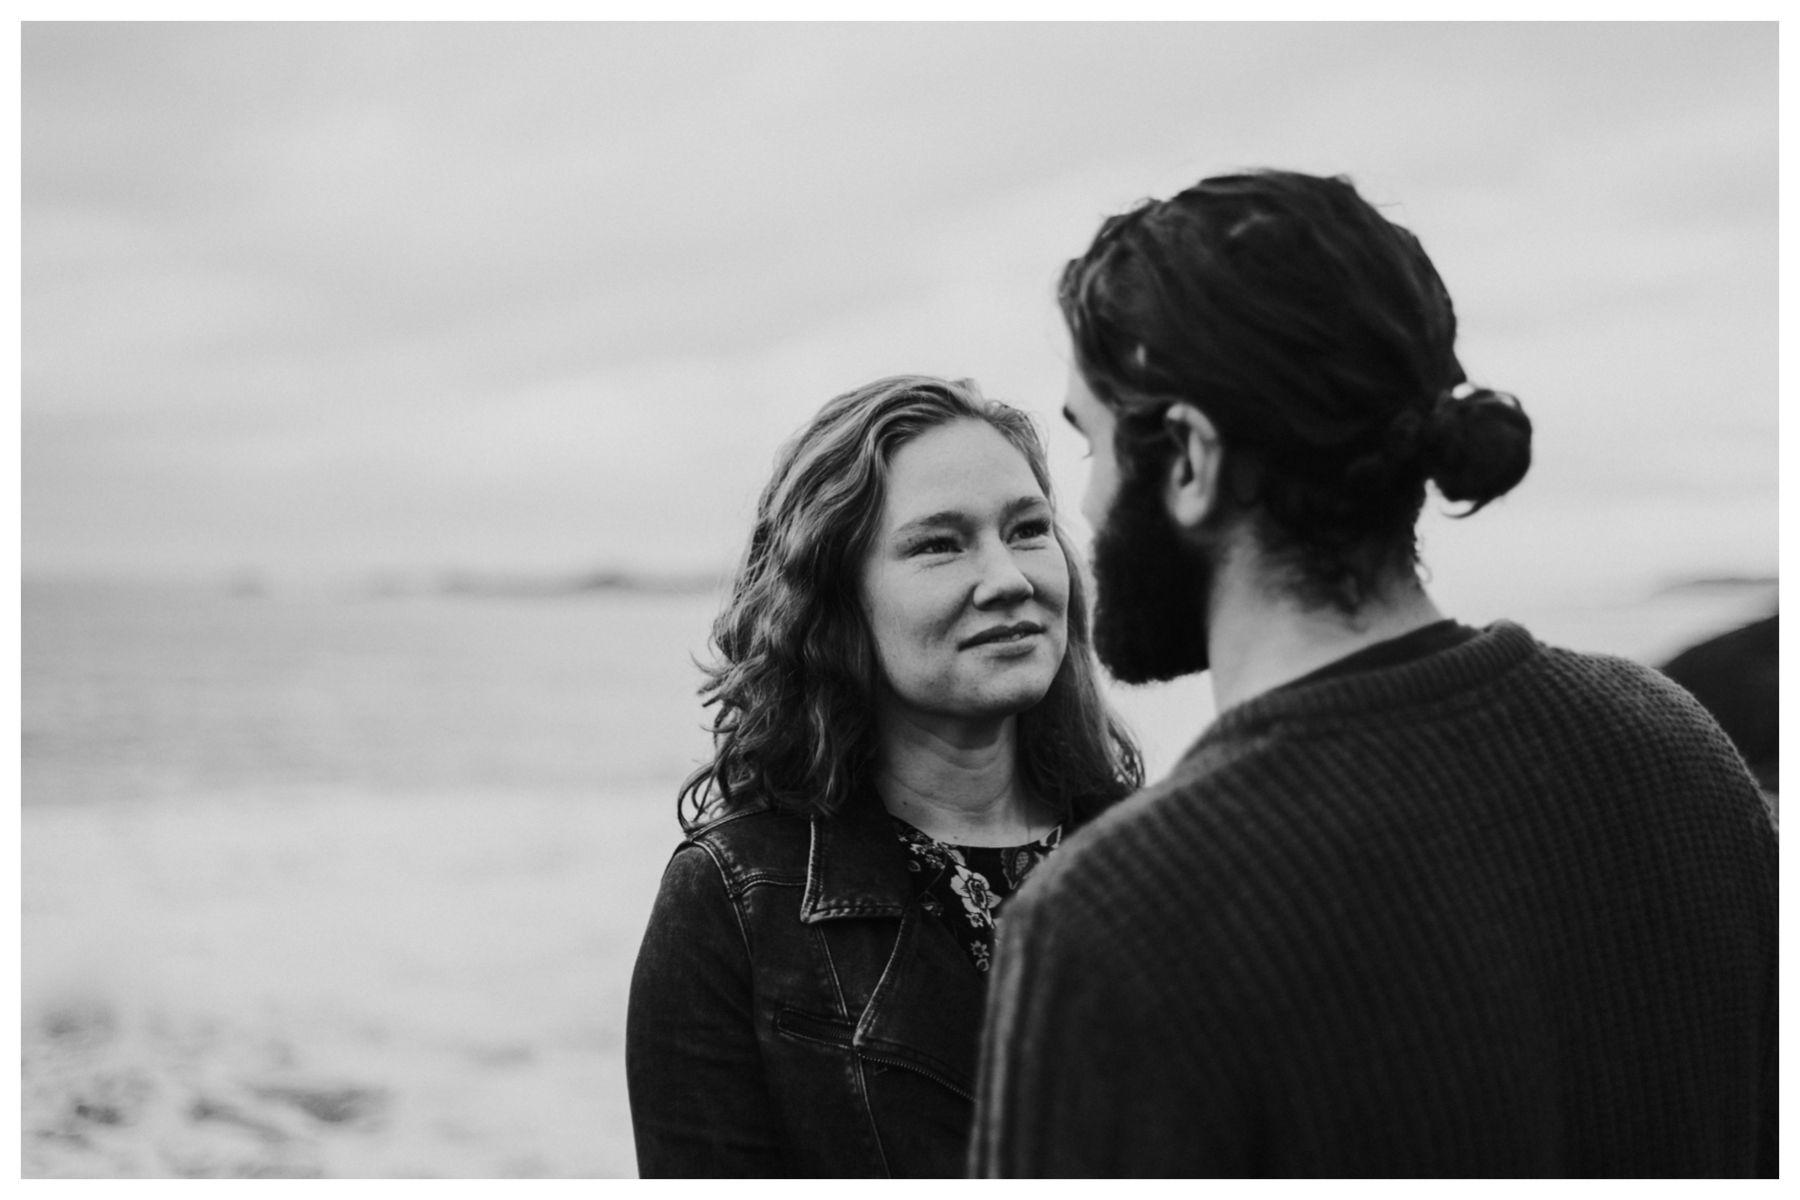 Tofino wedding photographer for a destination engagement photography session on Vancouver Island, BC - Image 22